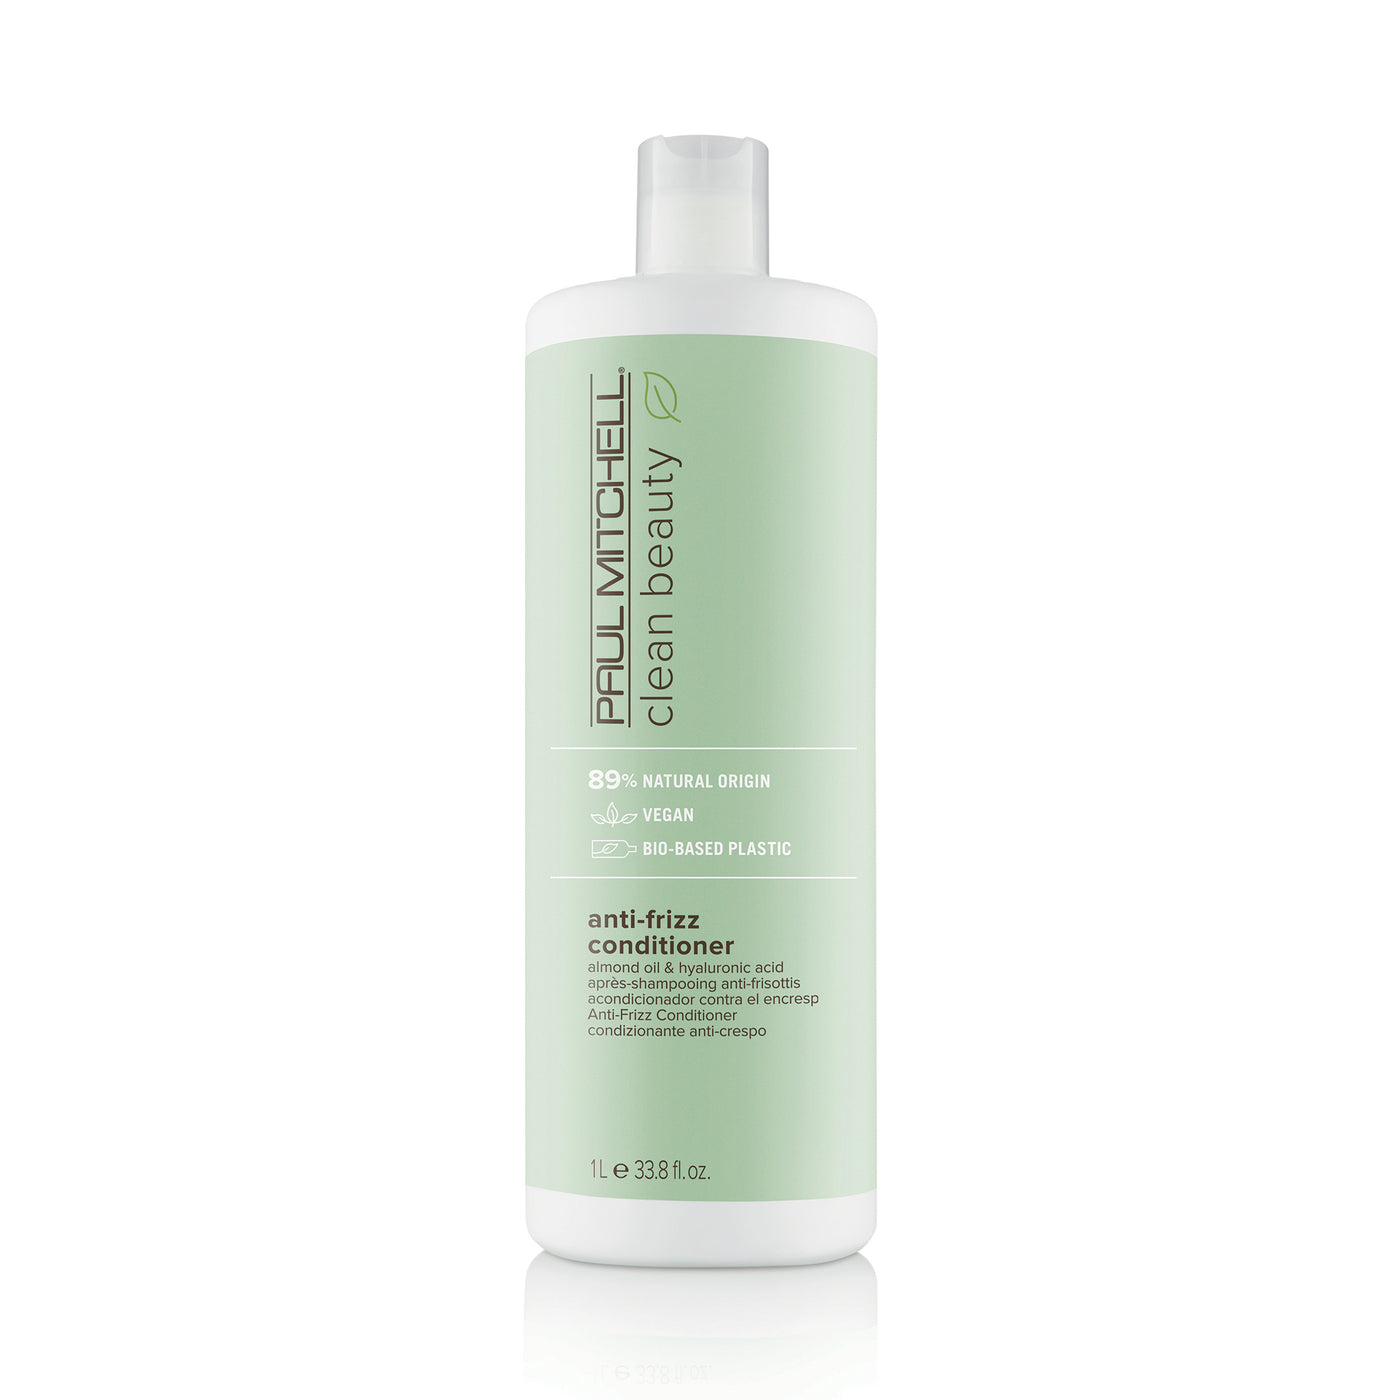 Clean Beauty by Paul Mitchell (1000 ml) Anti-Frizz Conditioner - Salon Warehouse